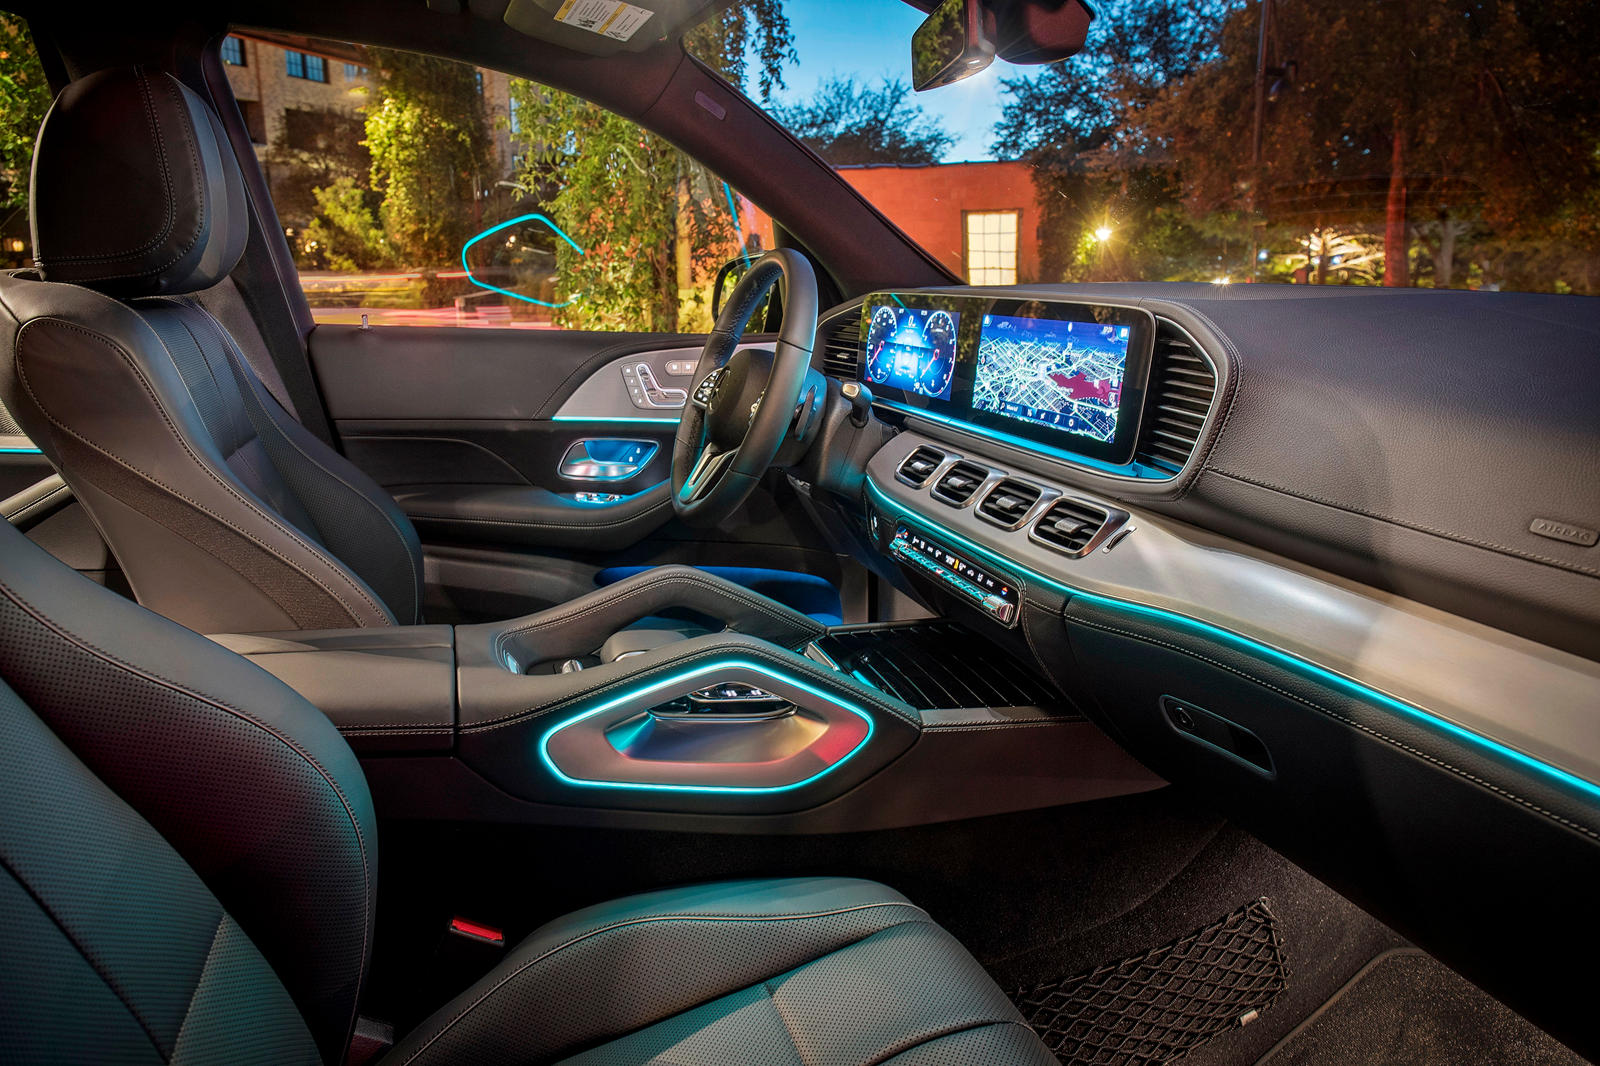 Sneak peek at the interior of the 2022 Mercedes GLE